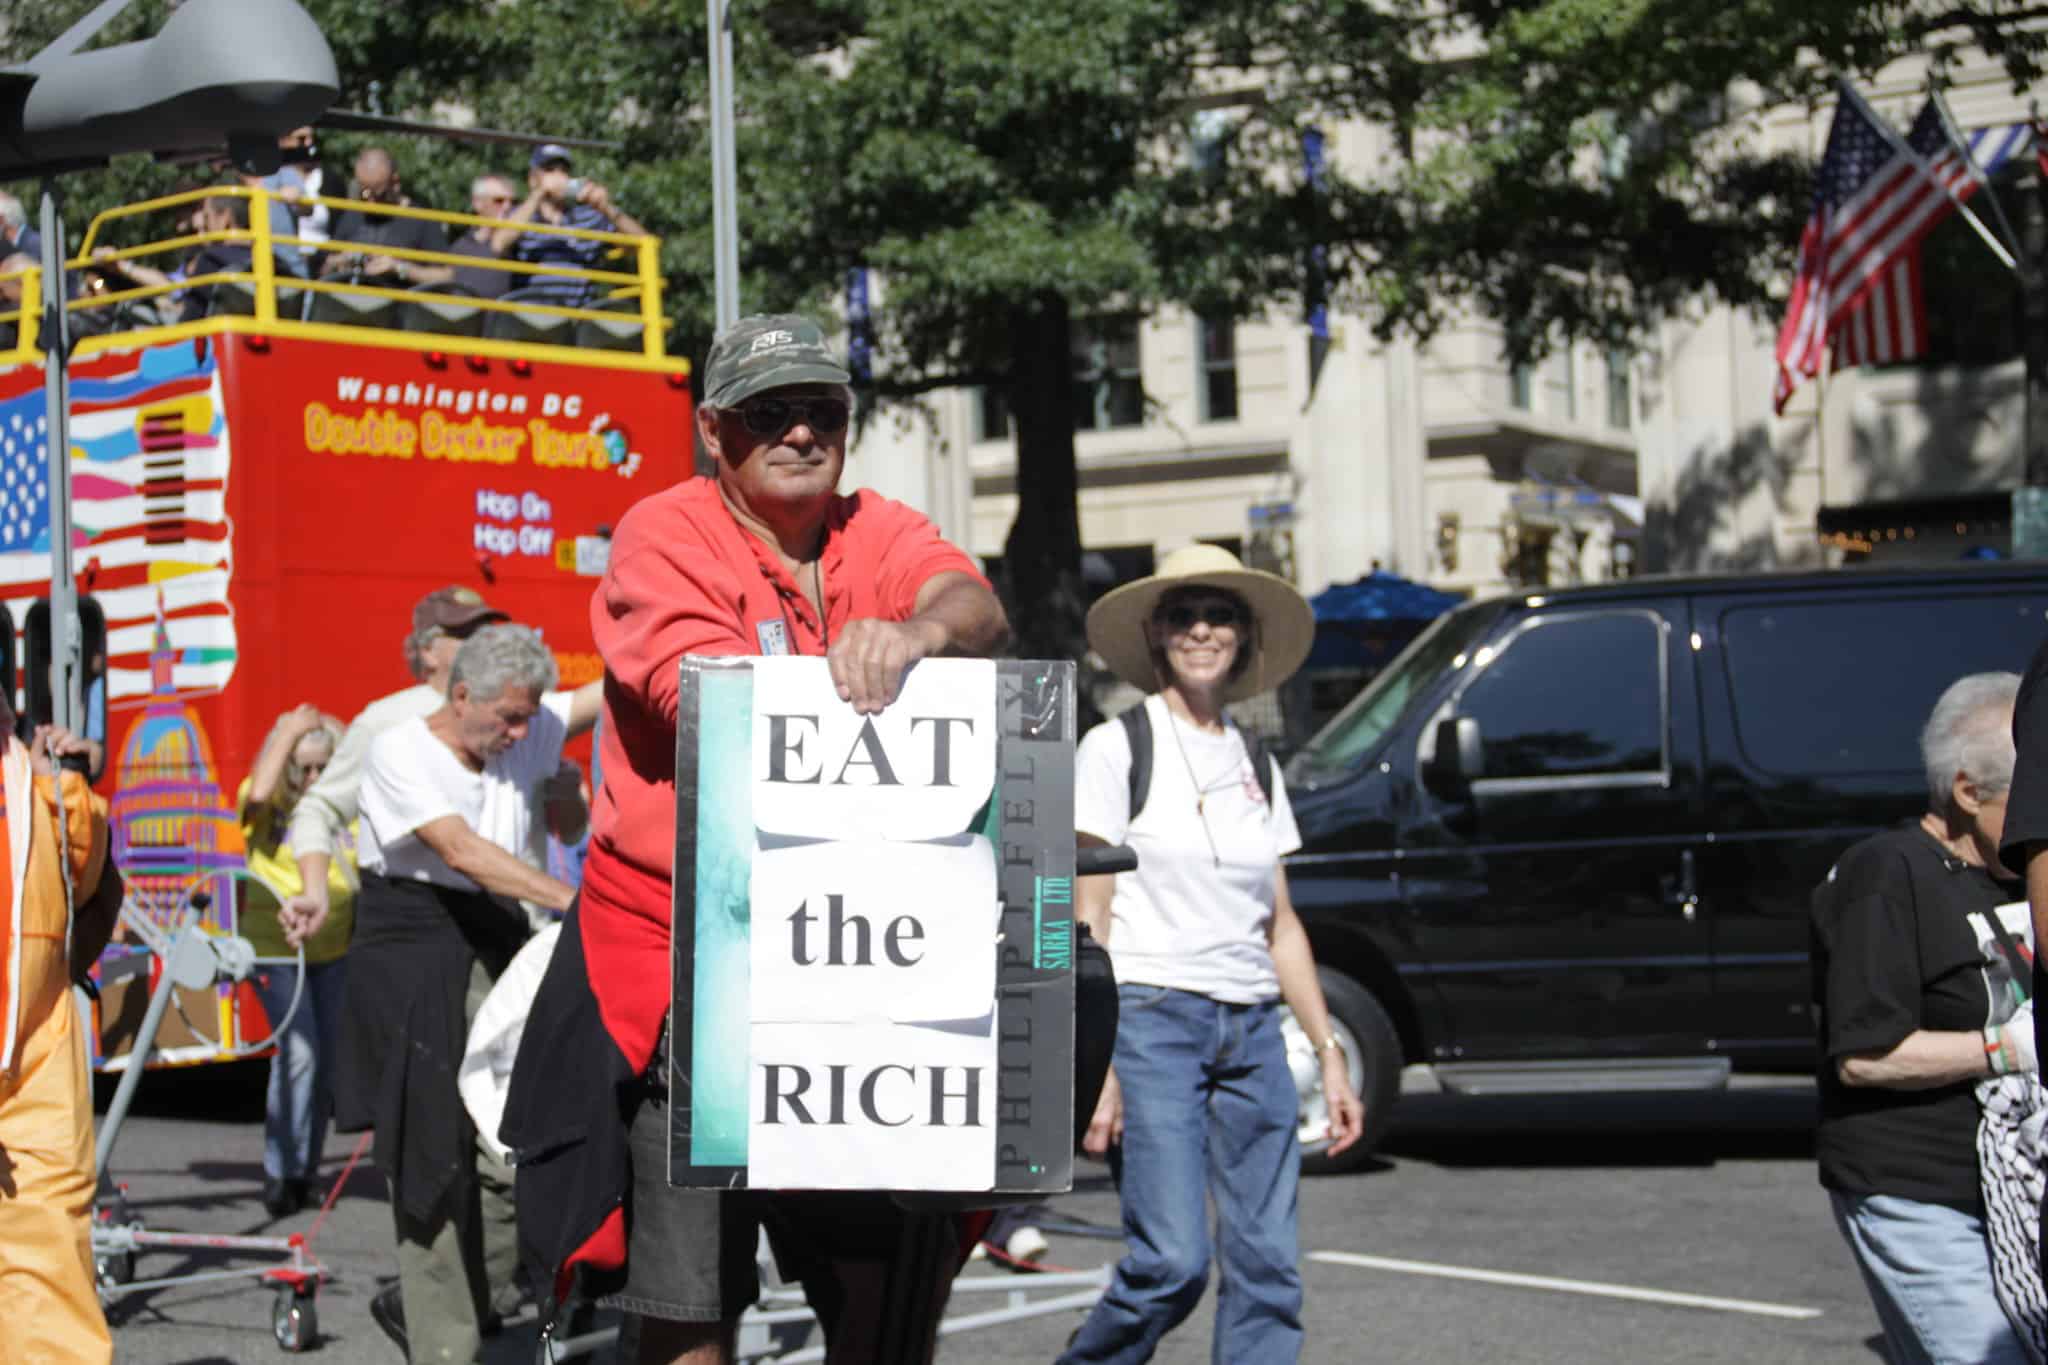 'eat the rich' sign (image: meesh via Flickr)